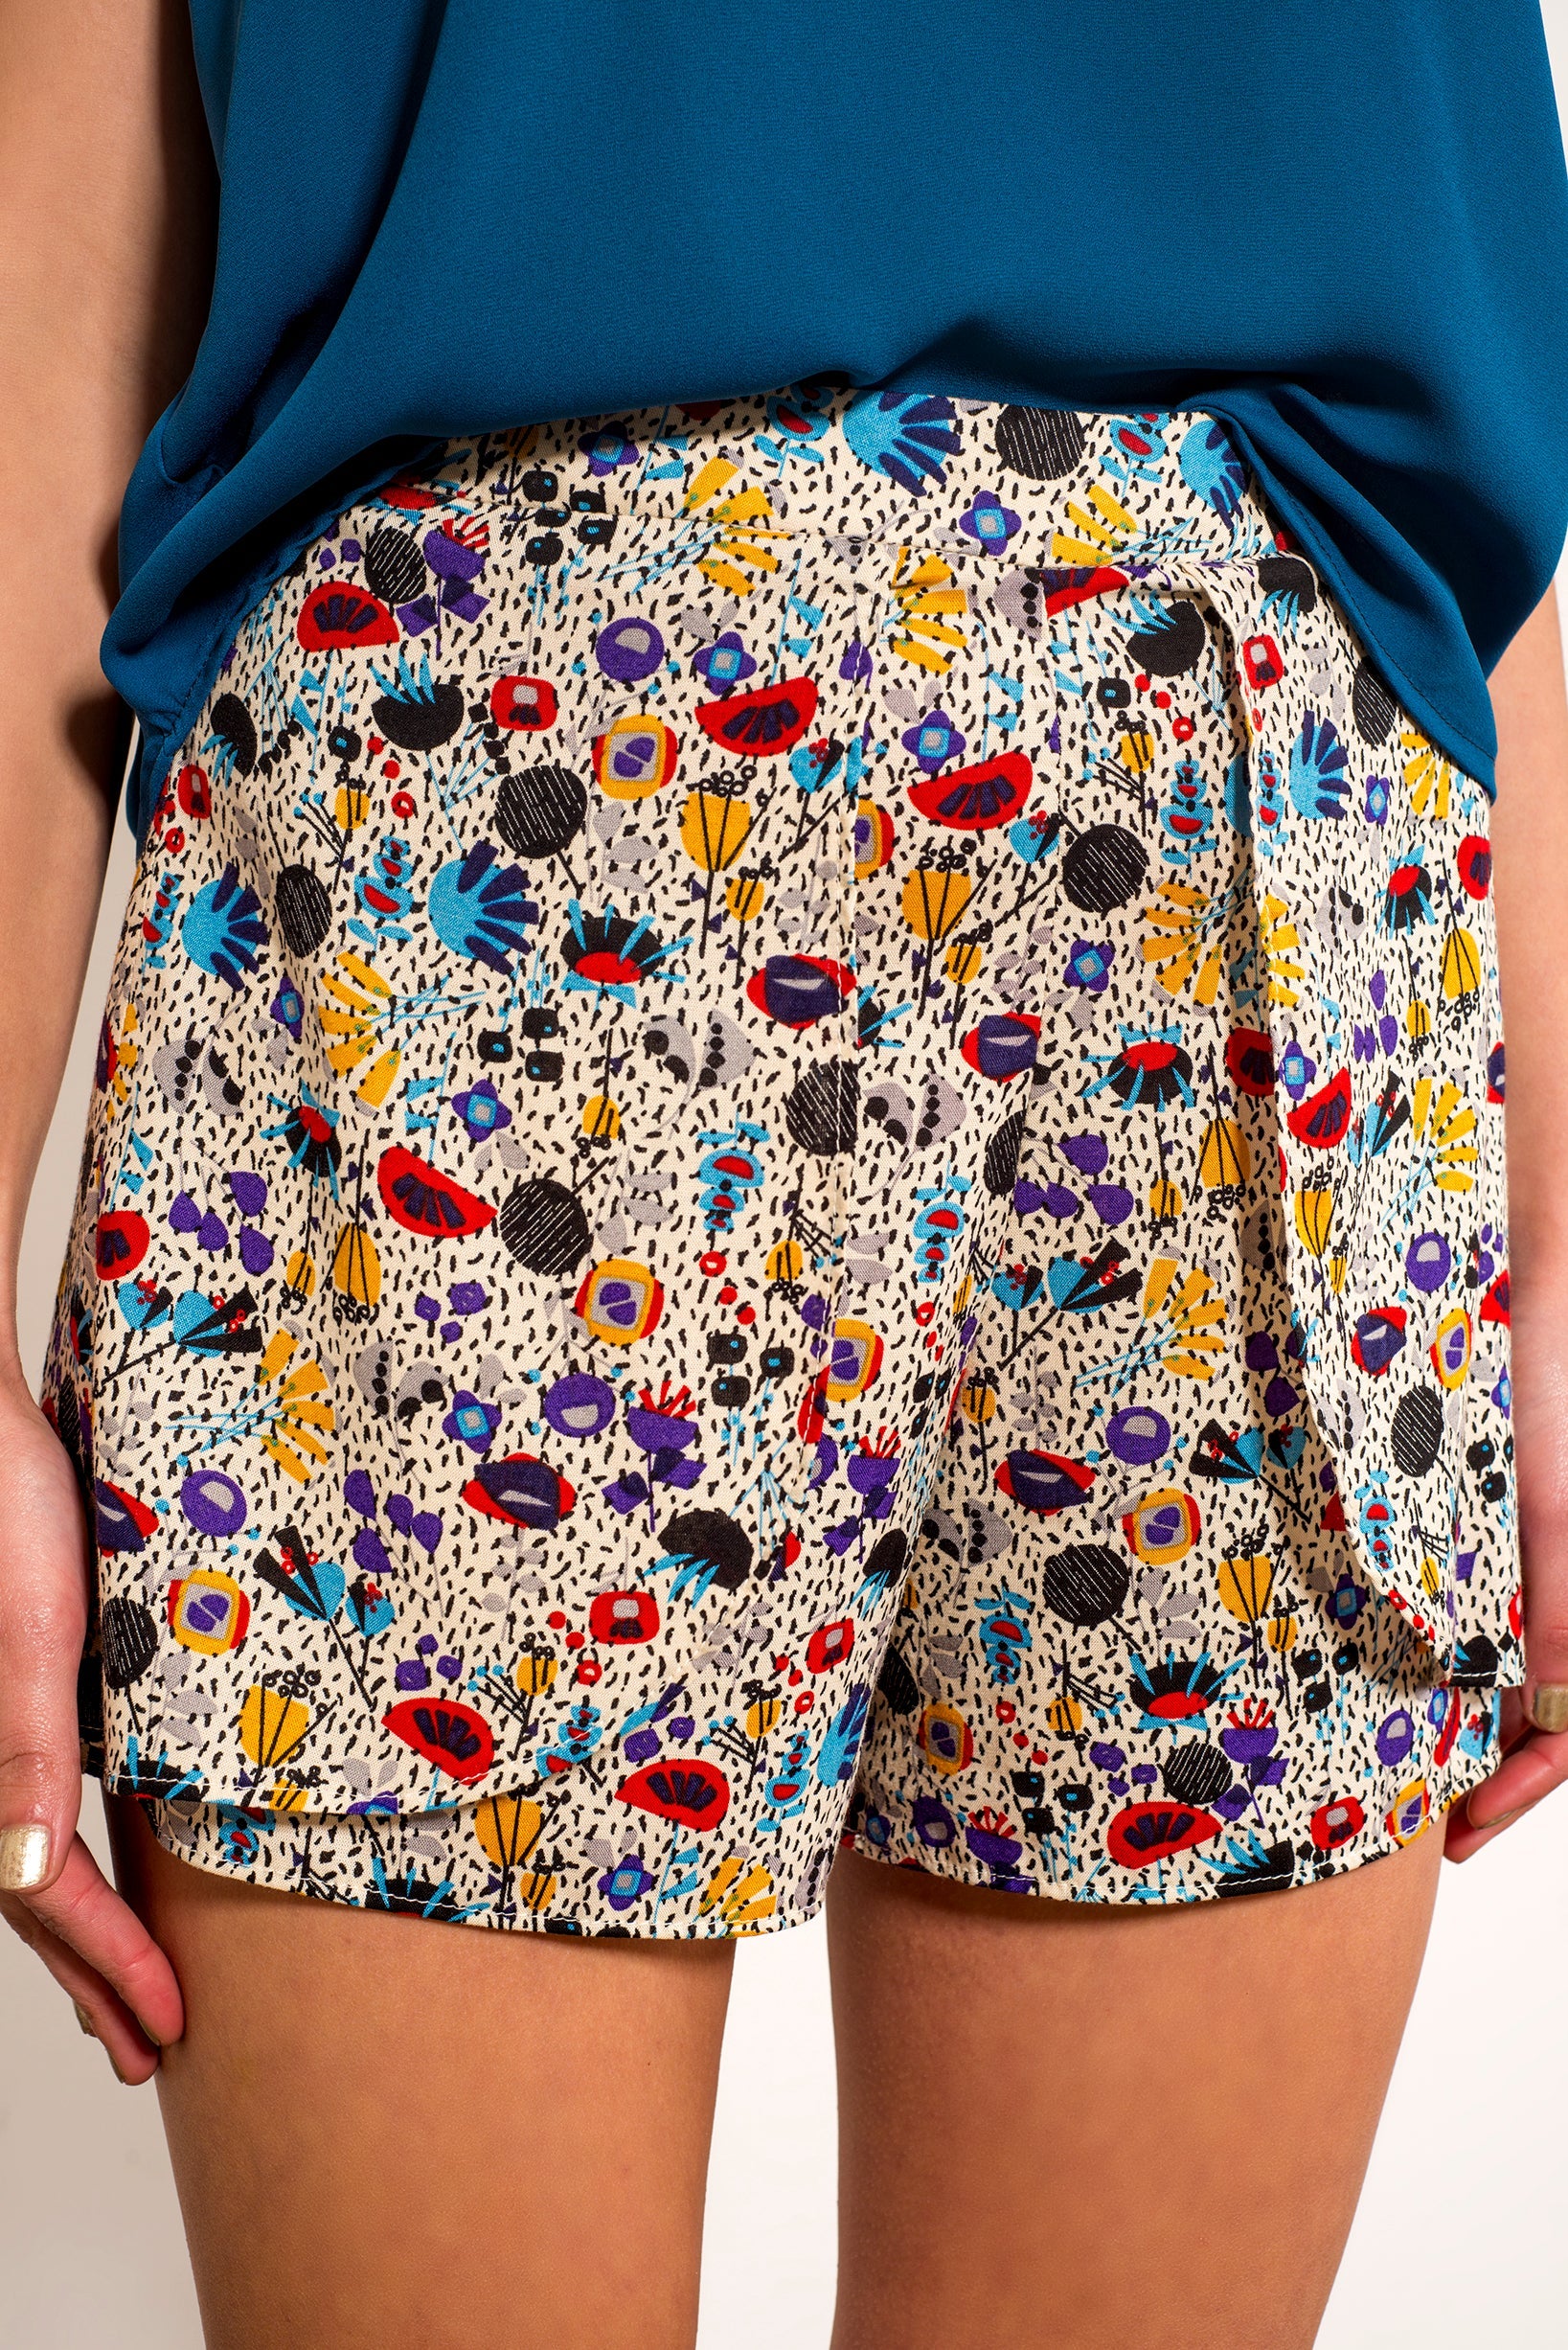 Eclectic Shorts (Second hand)